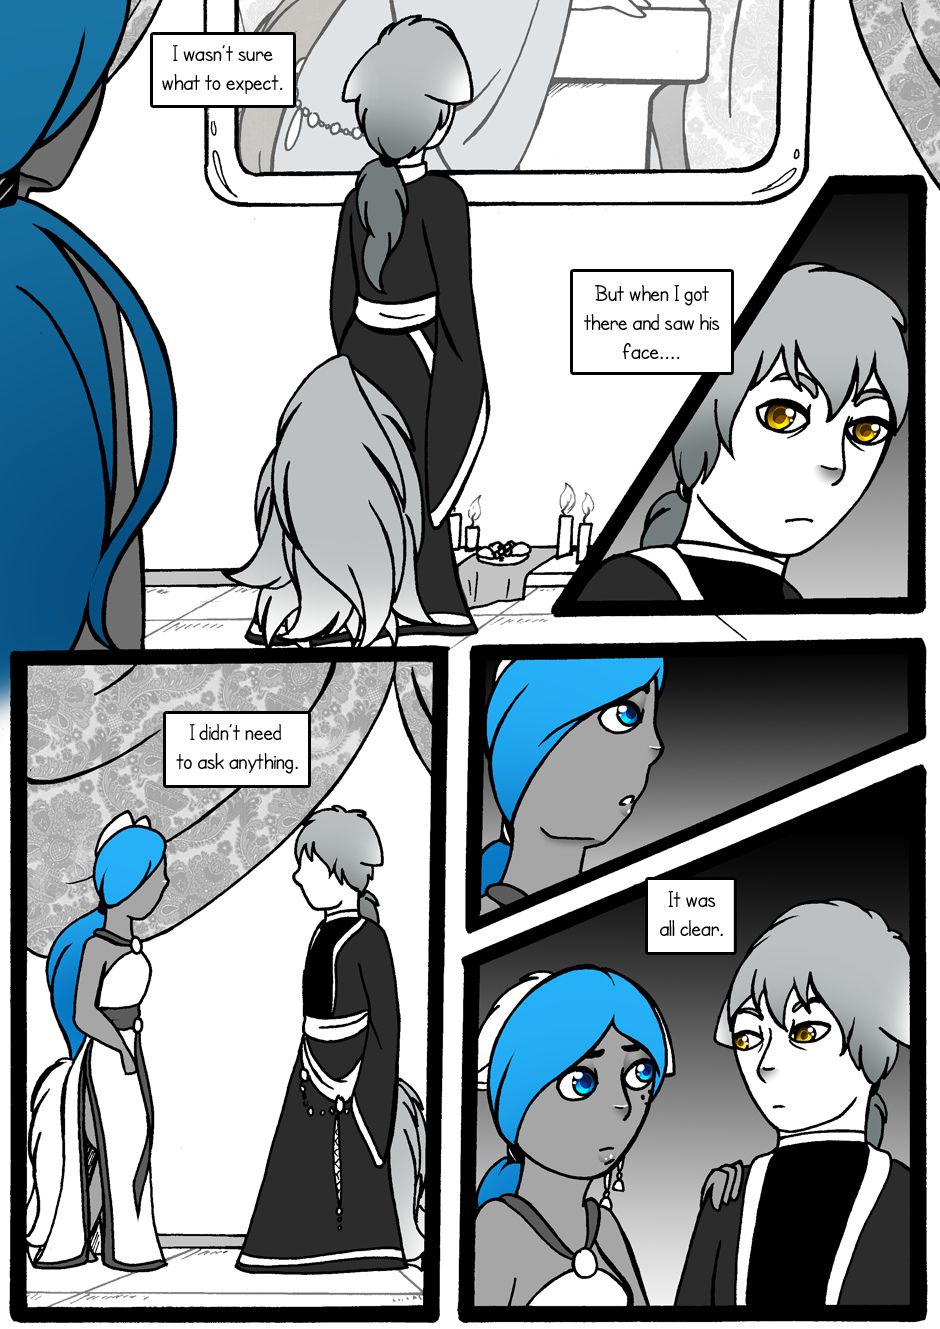 [Jeny-jen94] Between Kings and Queens [Ongoing] 116